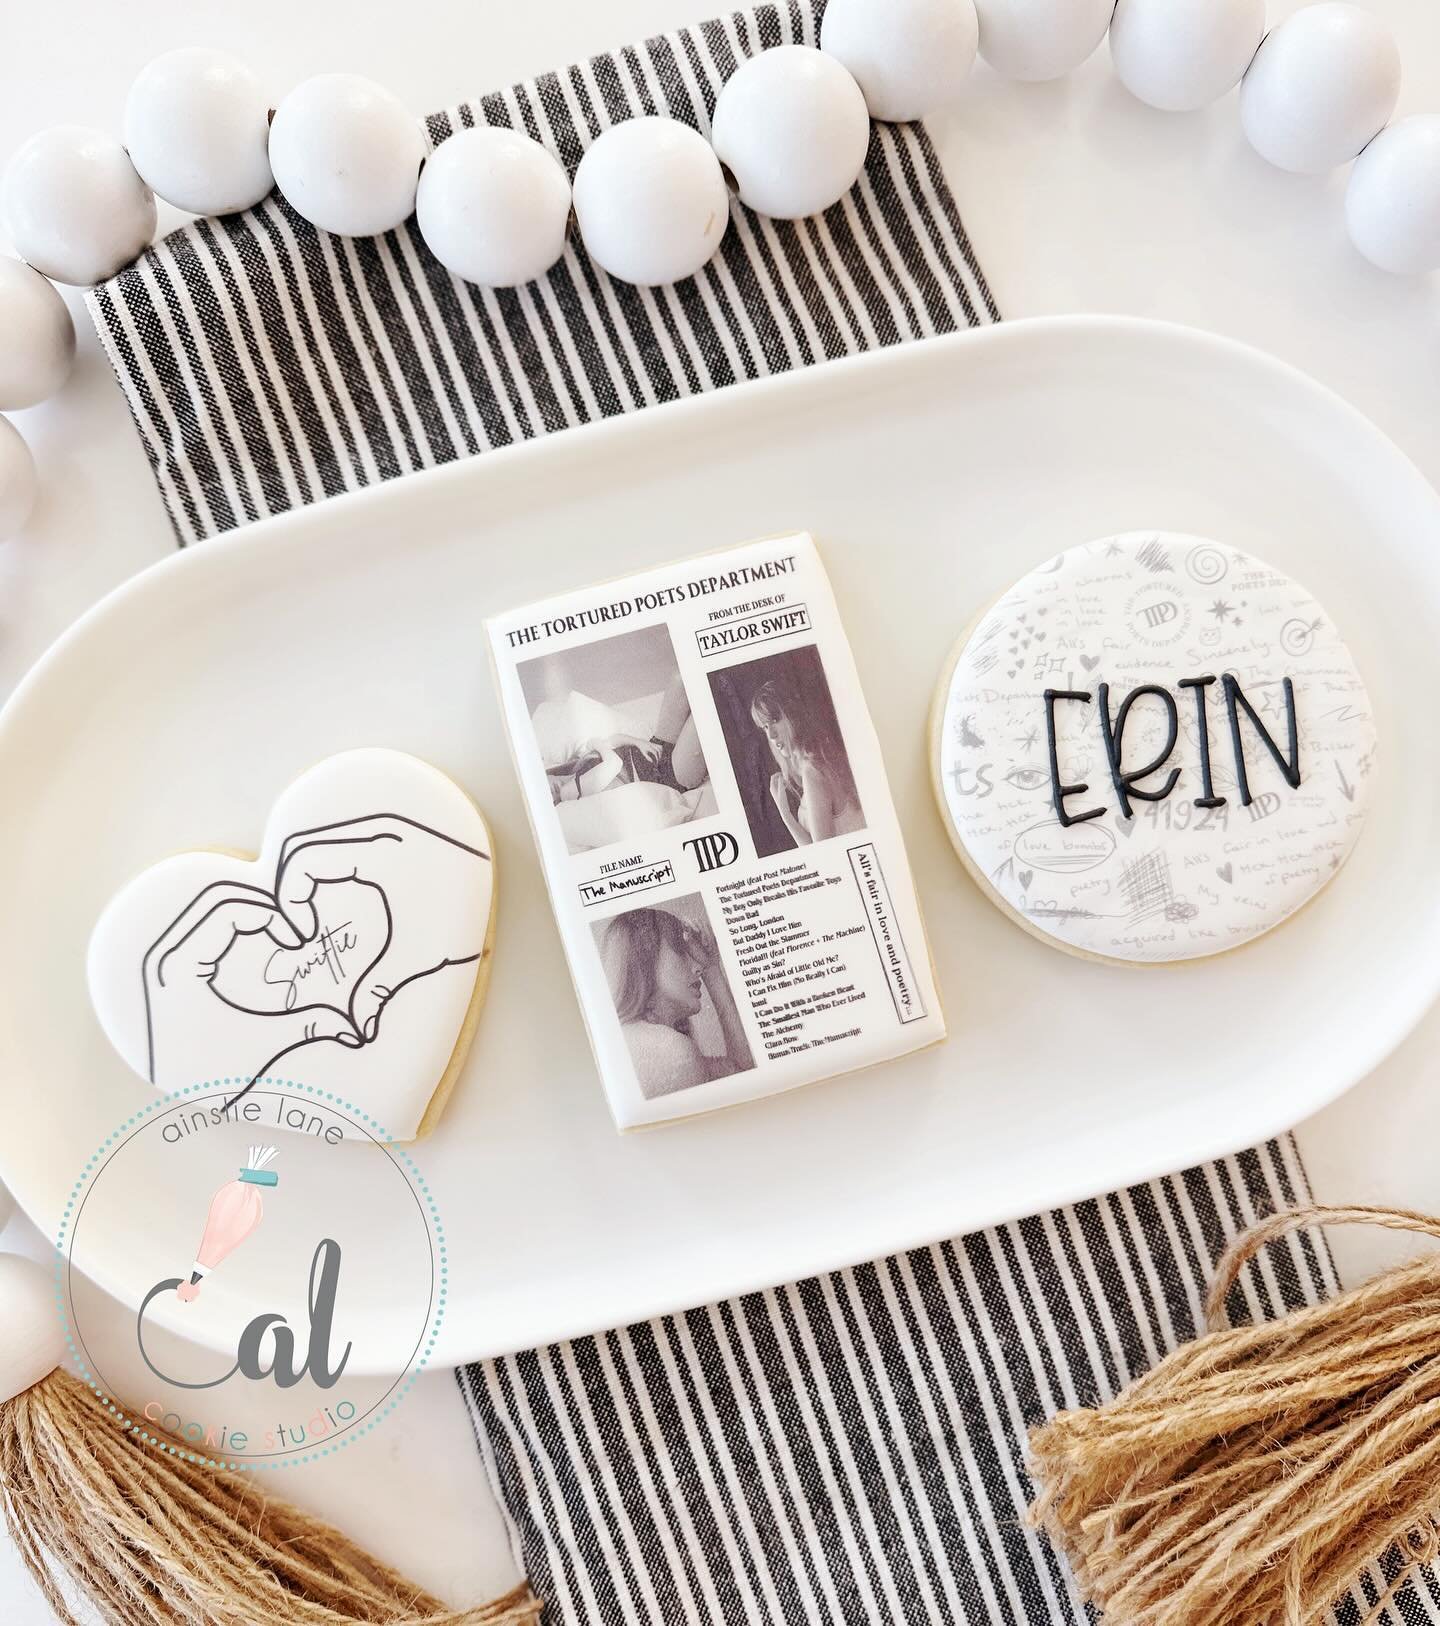 Are you a Swiftie? Do you know someone who is? Order your TTPD cookies to pickup Thursday 4/18 the day before the album drops! 
&bull;
&bull;
&bull;
&bull; #taylorswiftcookies #ainslielanecookiestudio #decoratedcookies #lodicookies #cookiesofinstagra